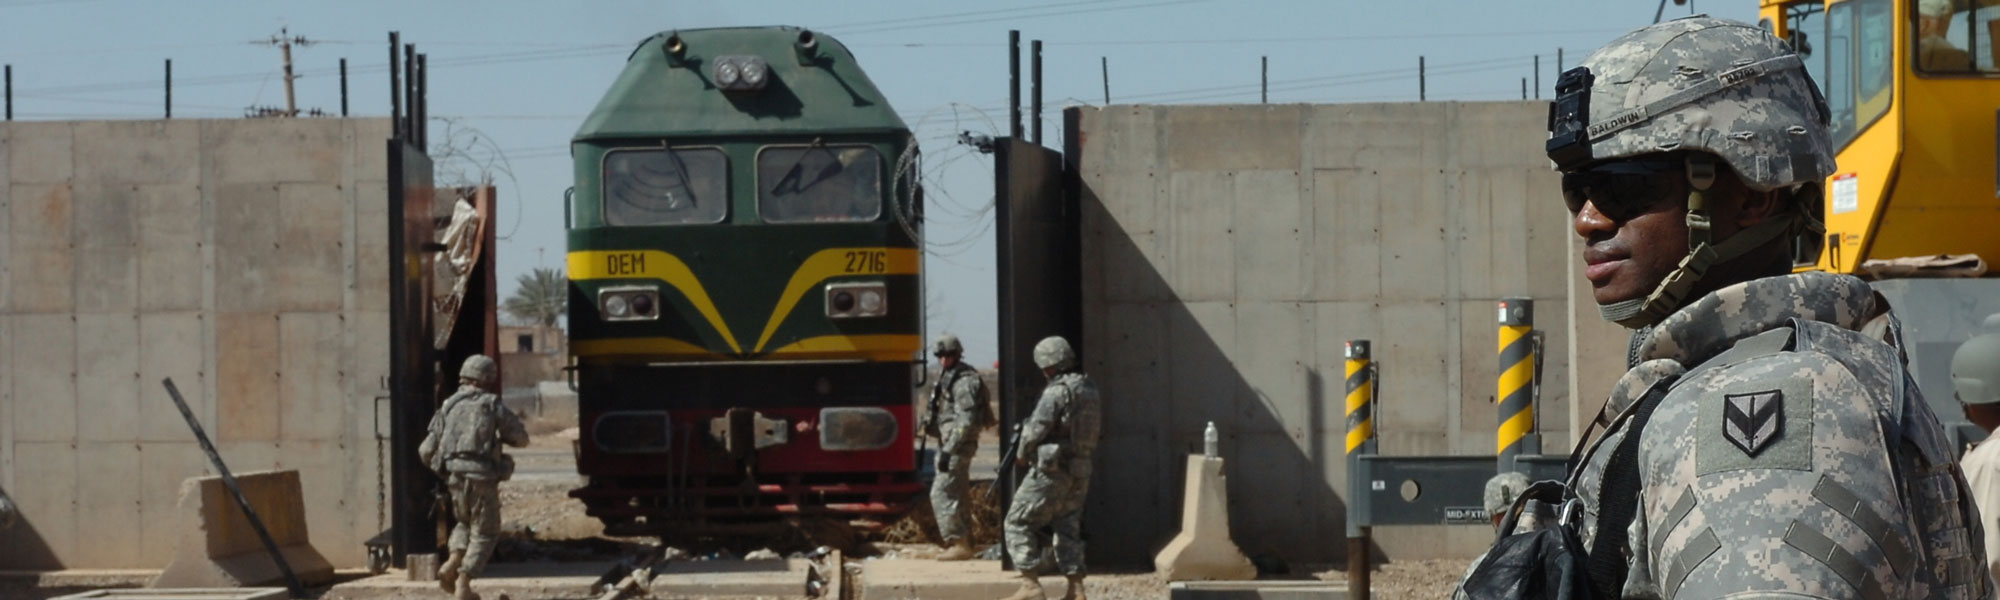 MAJ Baldwin, the mobility chief for the 1st Sustainment Brigade, looks on as Soldiers from 2nd Battalion, 11th Field Artillery Regiment opened the rail gates at Camp Taji from Baghdad on 10 March 2008. US Army Image.